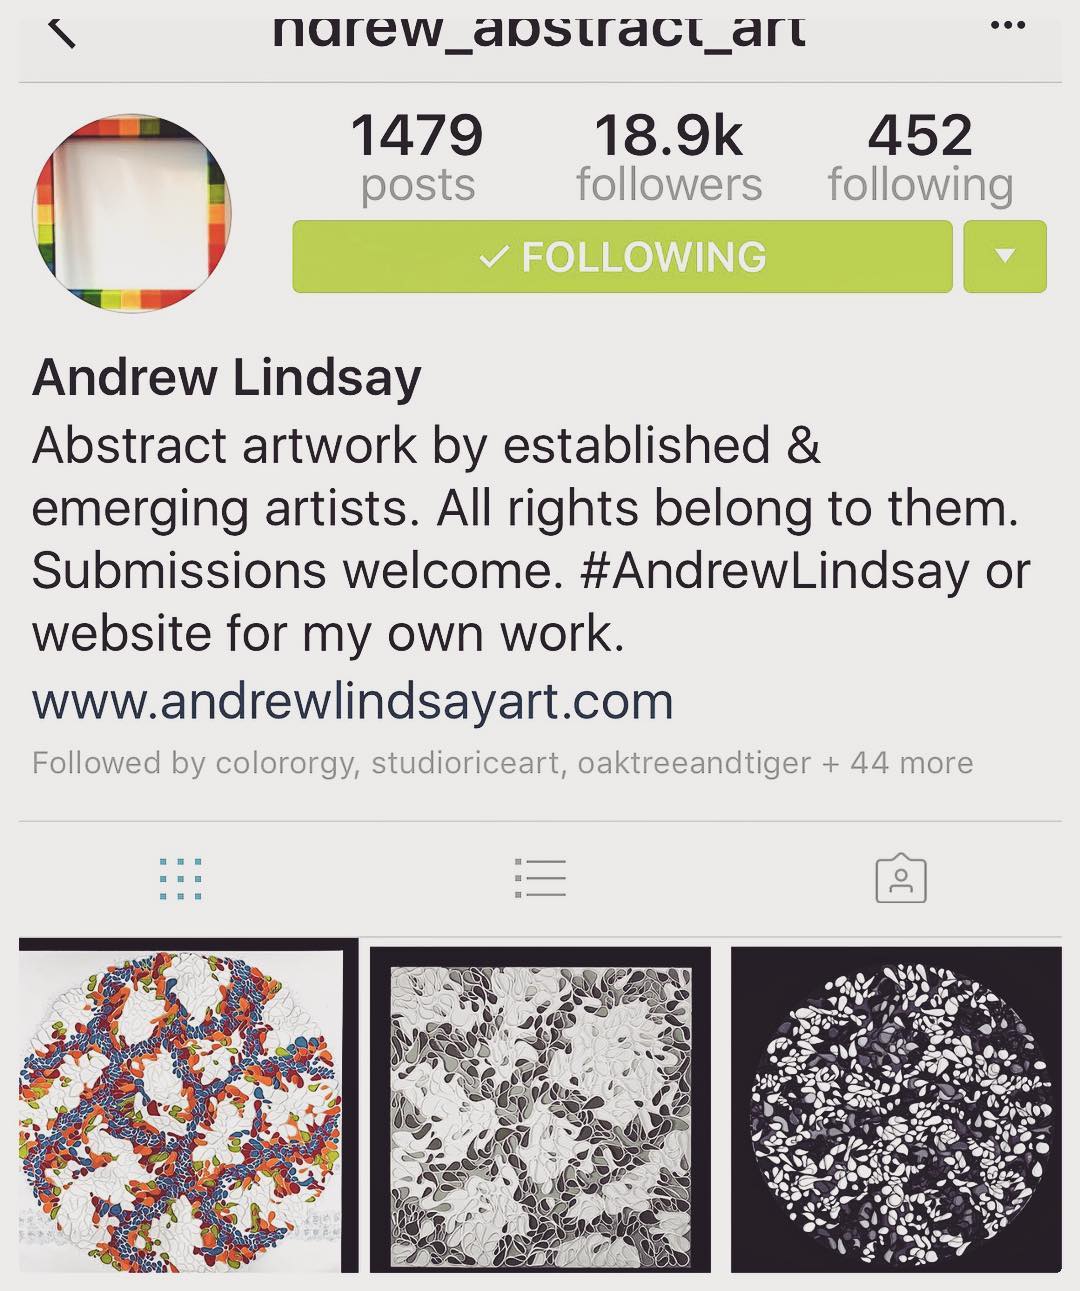 Special thanks to @ndrew_abstract_art for featuring my work today. If you don't already follow Andrews's account I recommend you add his @ndrew_abstract_art to your "follow list"